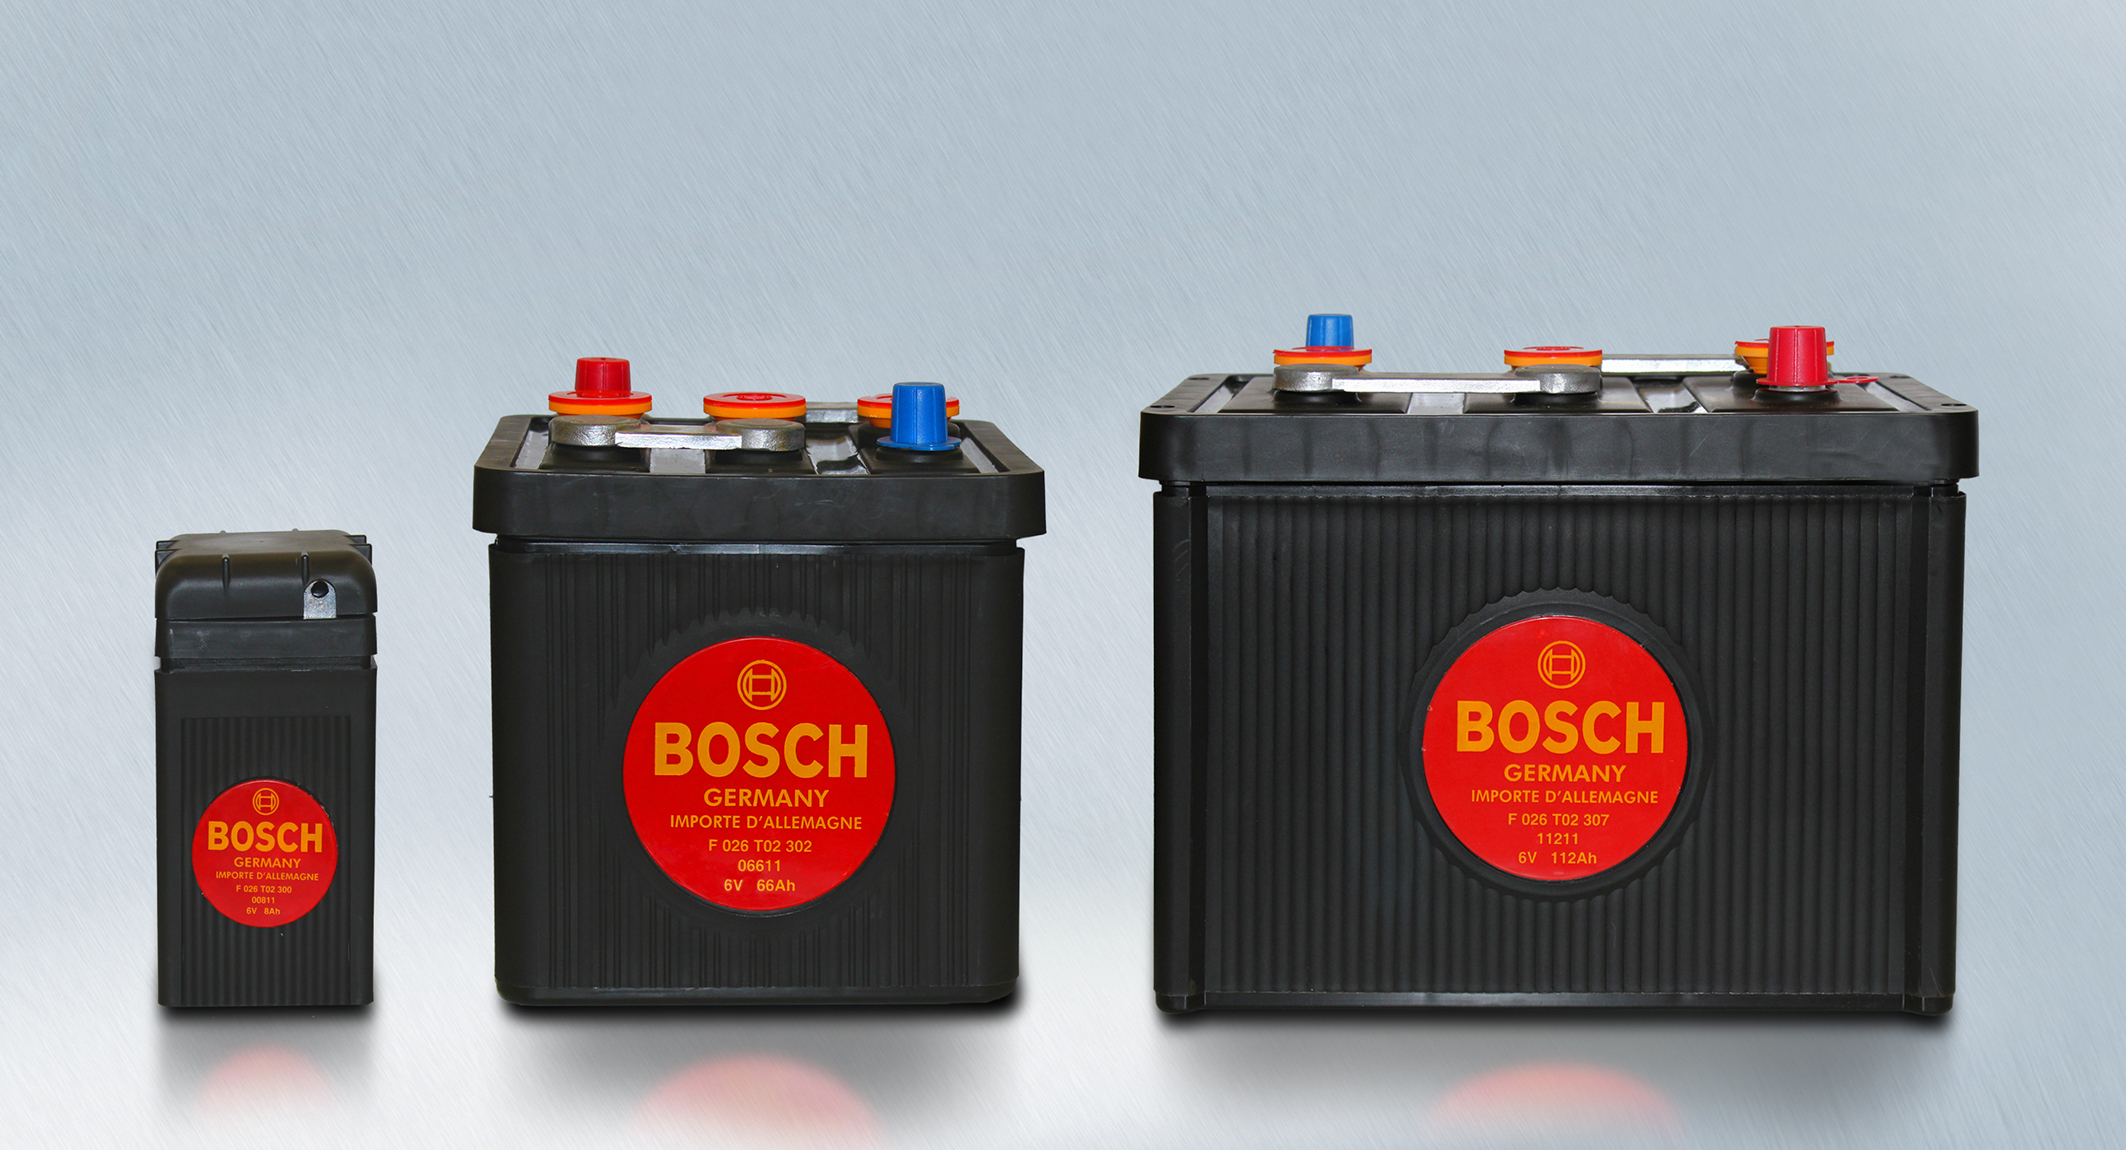 Bosch Automotive Tradition Reproduces Historic Starter Battery In